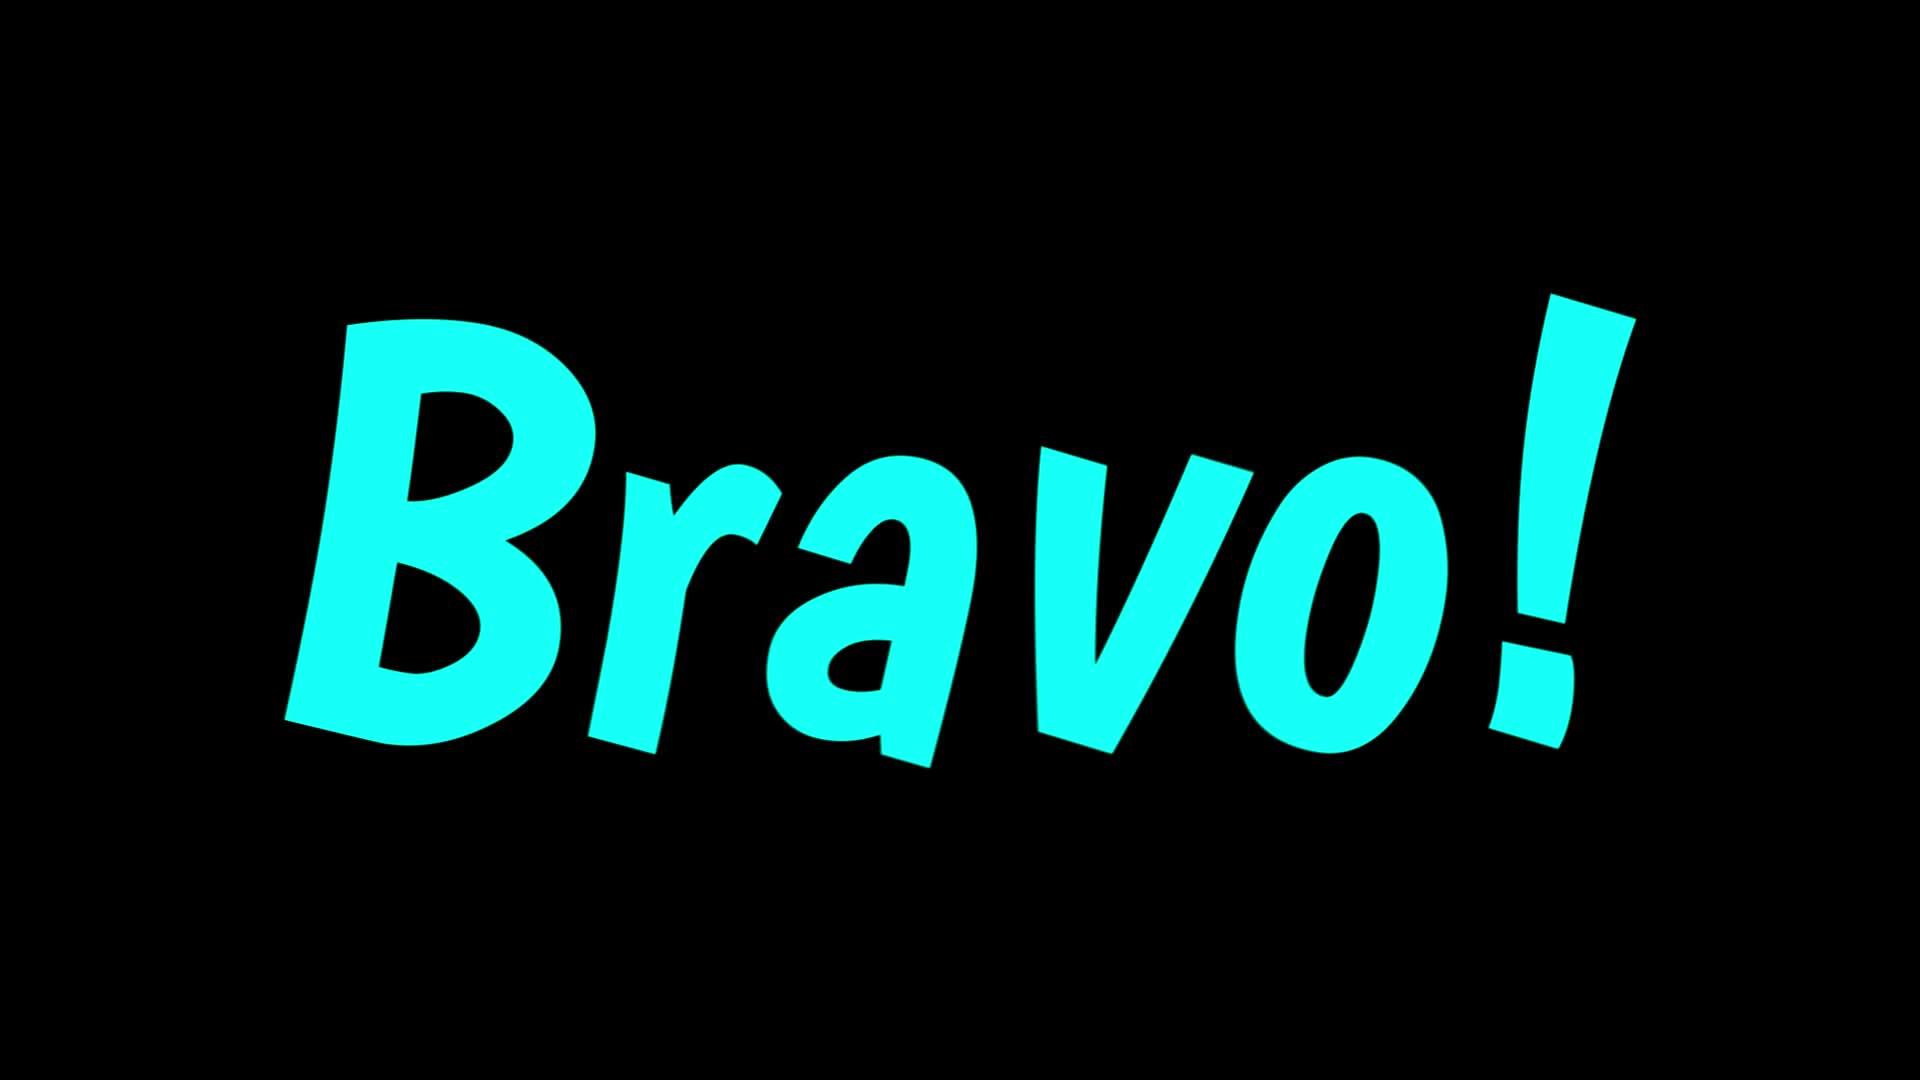 Bravo Phrase Bouncy, Colorful Text Animation on Black Background 18800149  Stock Video at Vecteezy